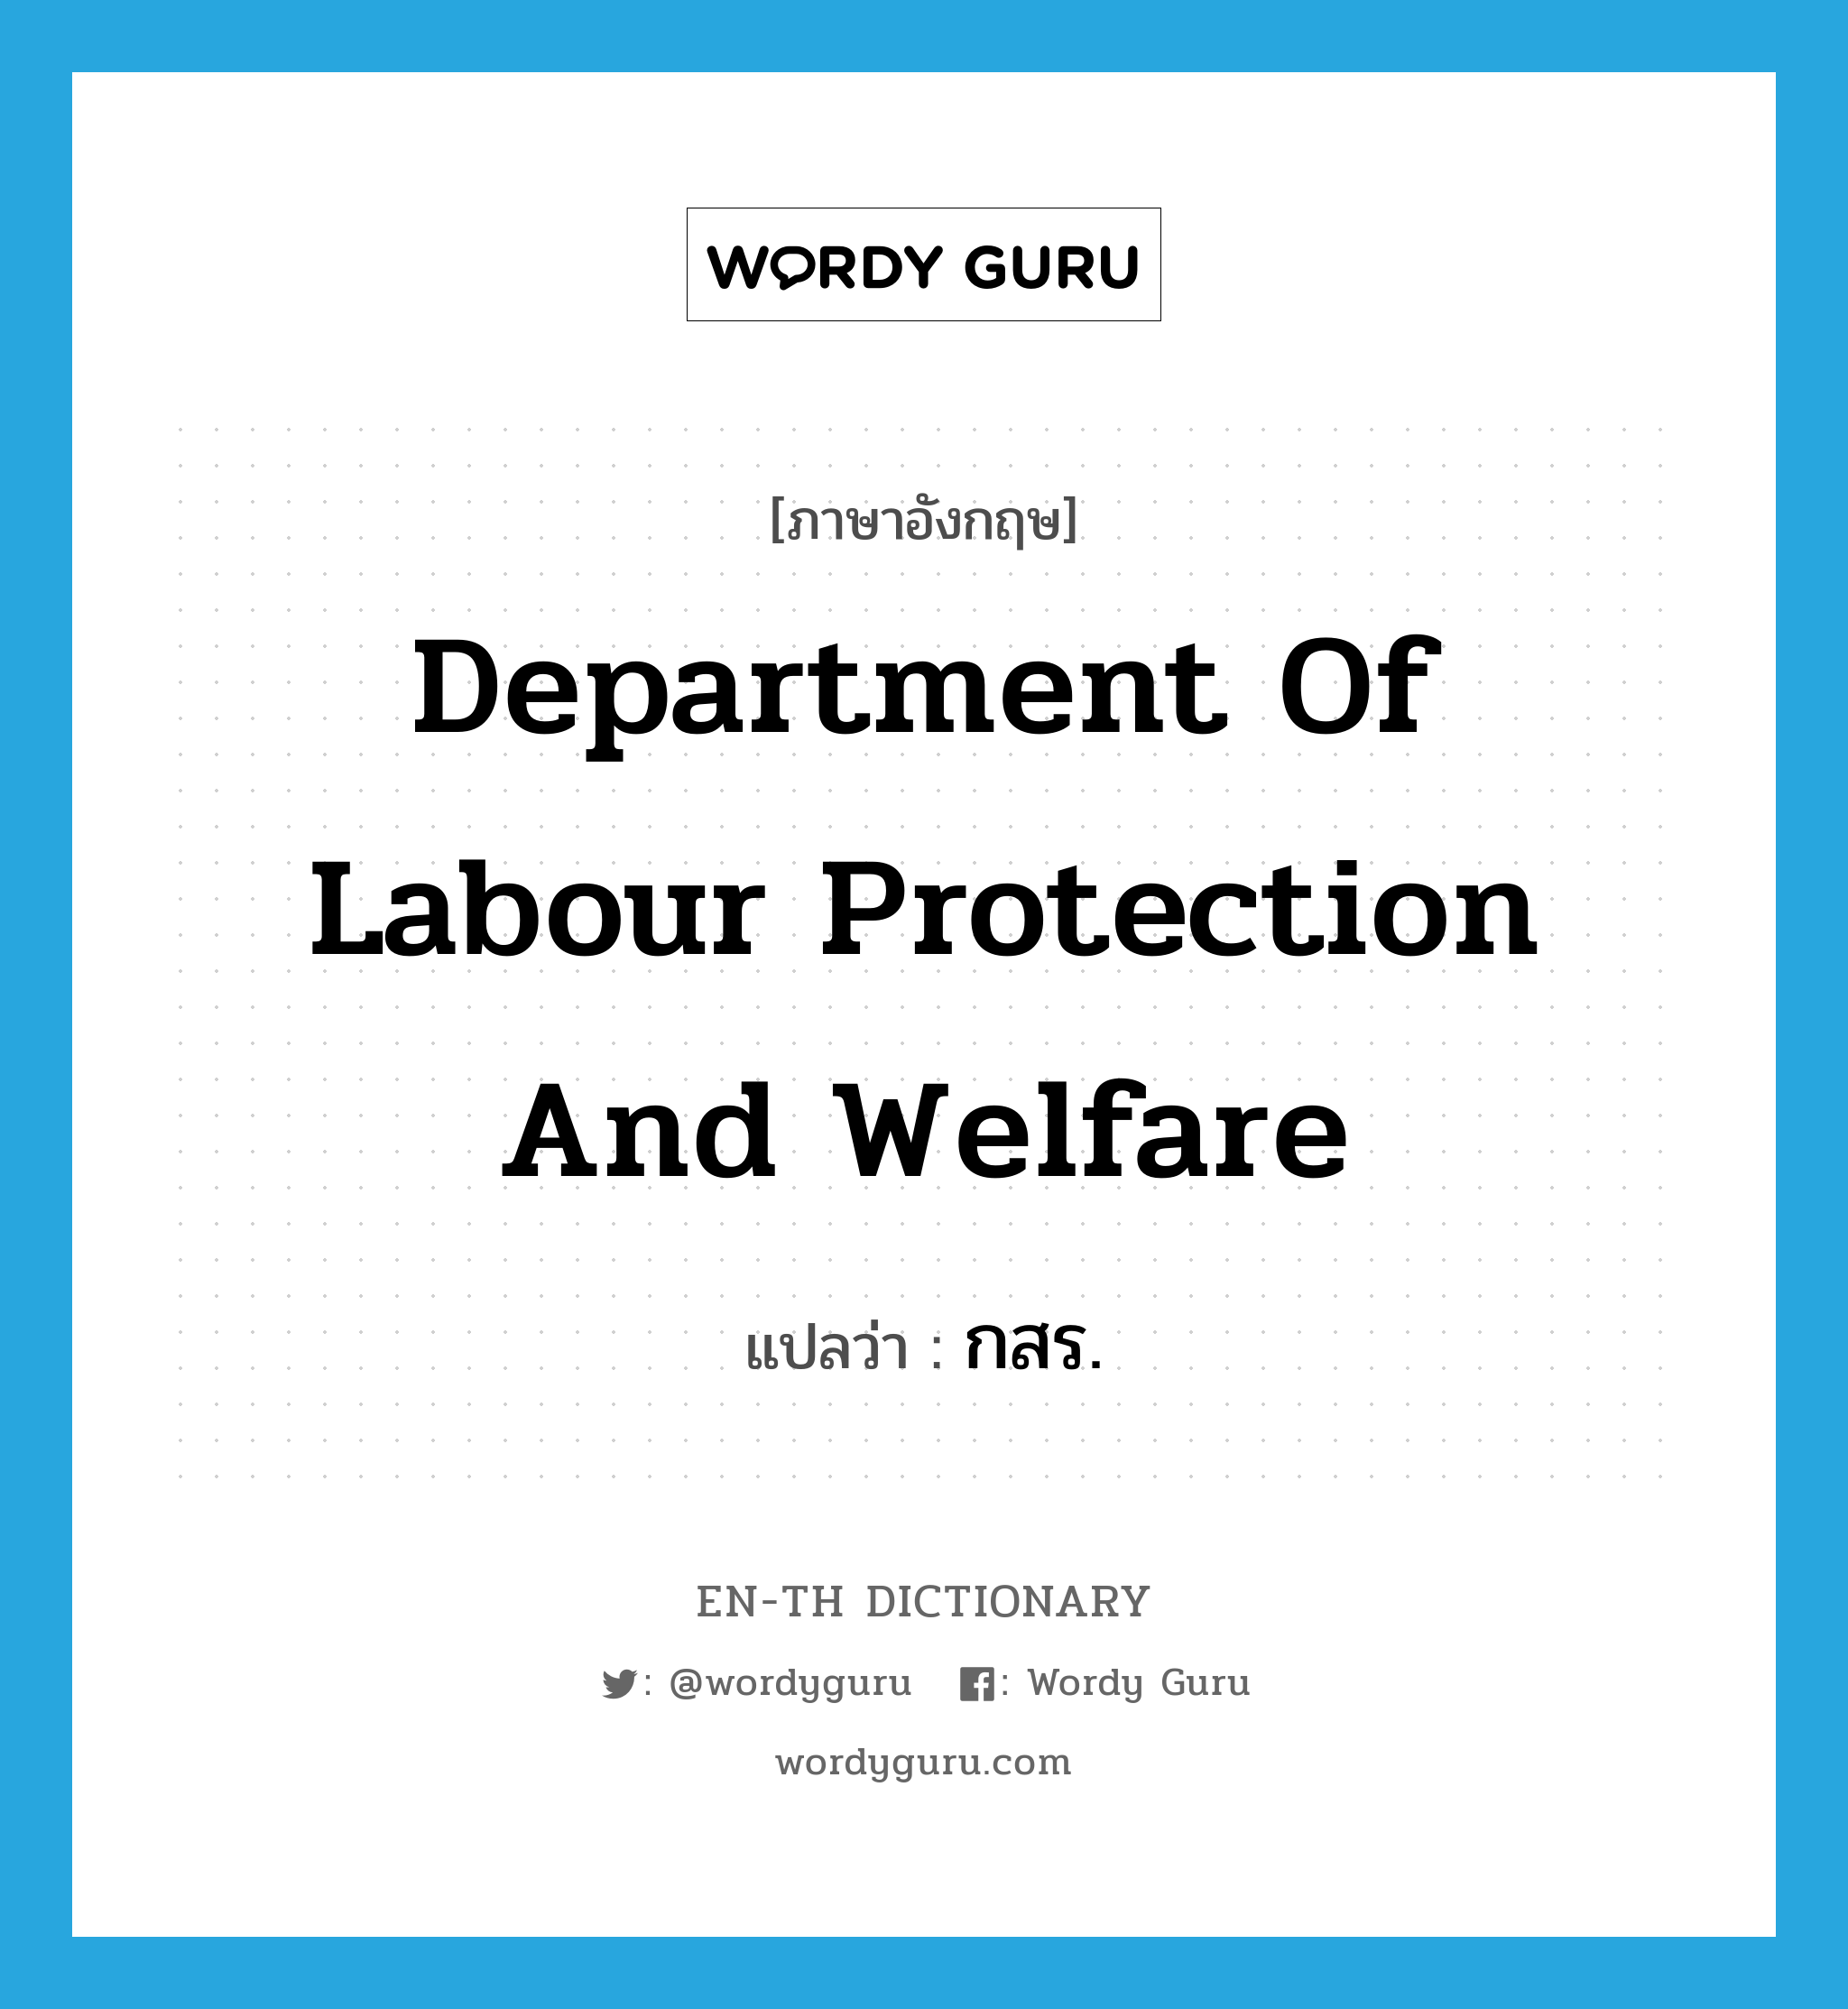 Department of Labour Protection and Welfare แปลว่า?, คำศัพท์ภาษาอังกฤษ Department of Labour Protection and Welfare แปลว่า กสร. ประเภท N หมวด N